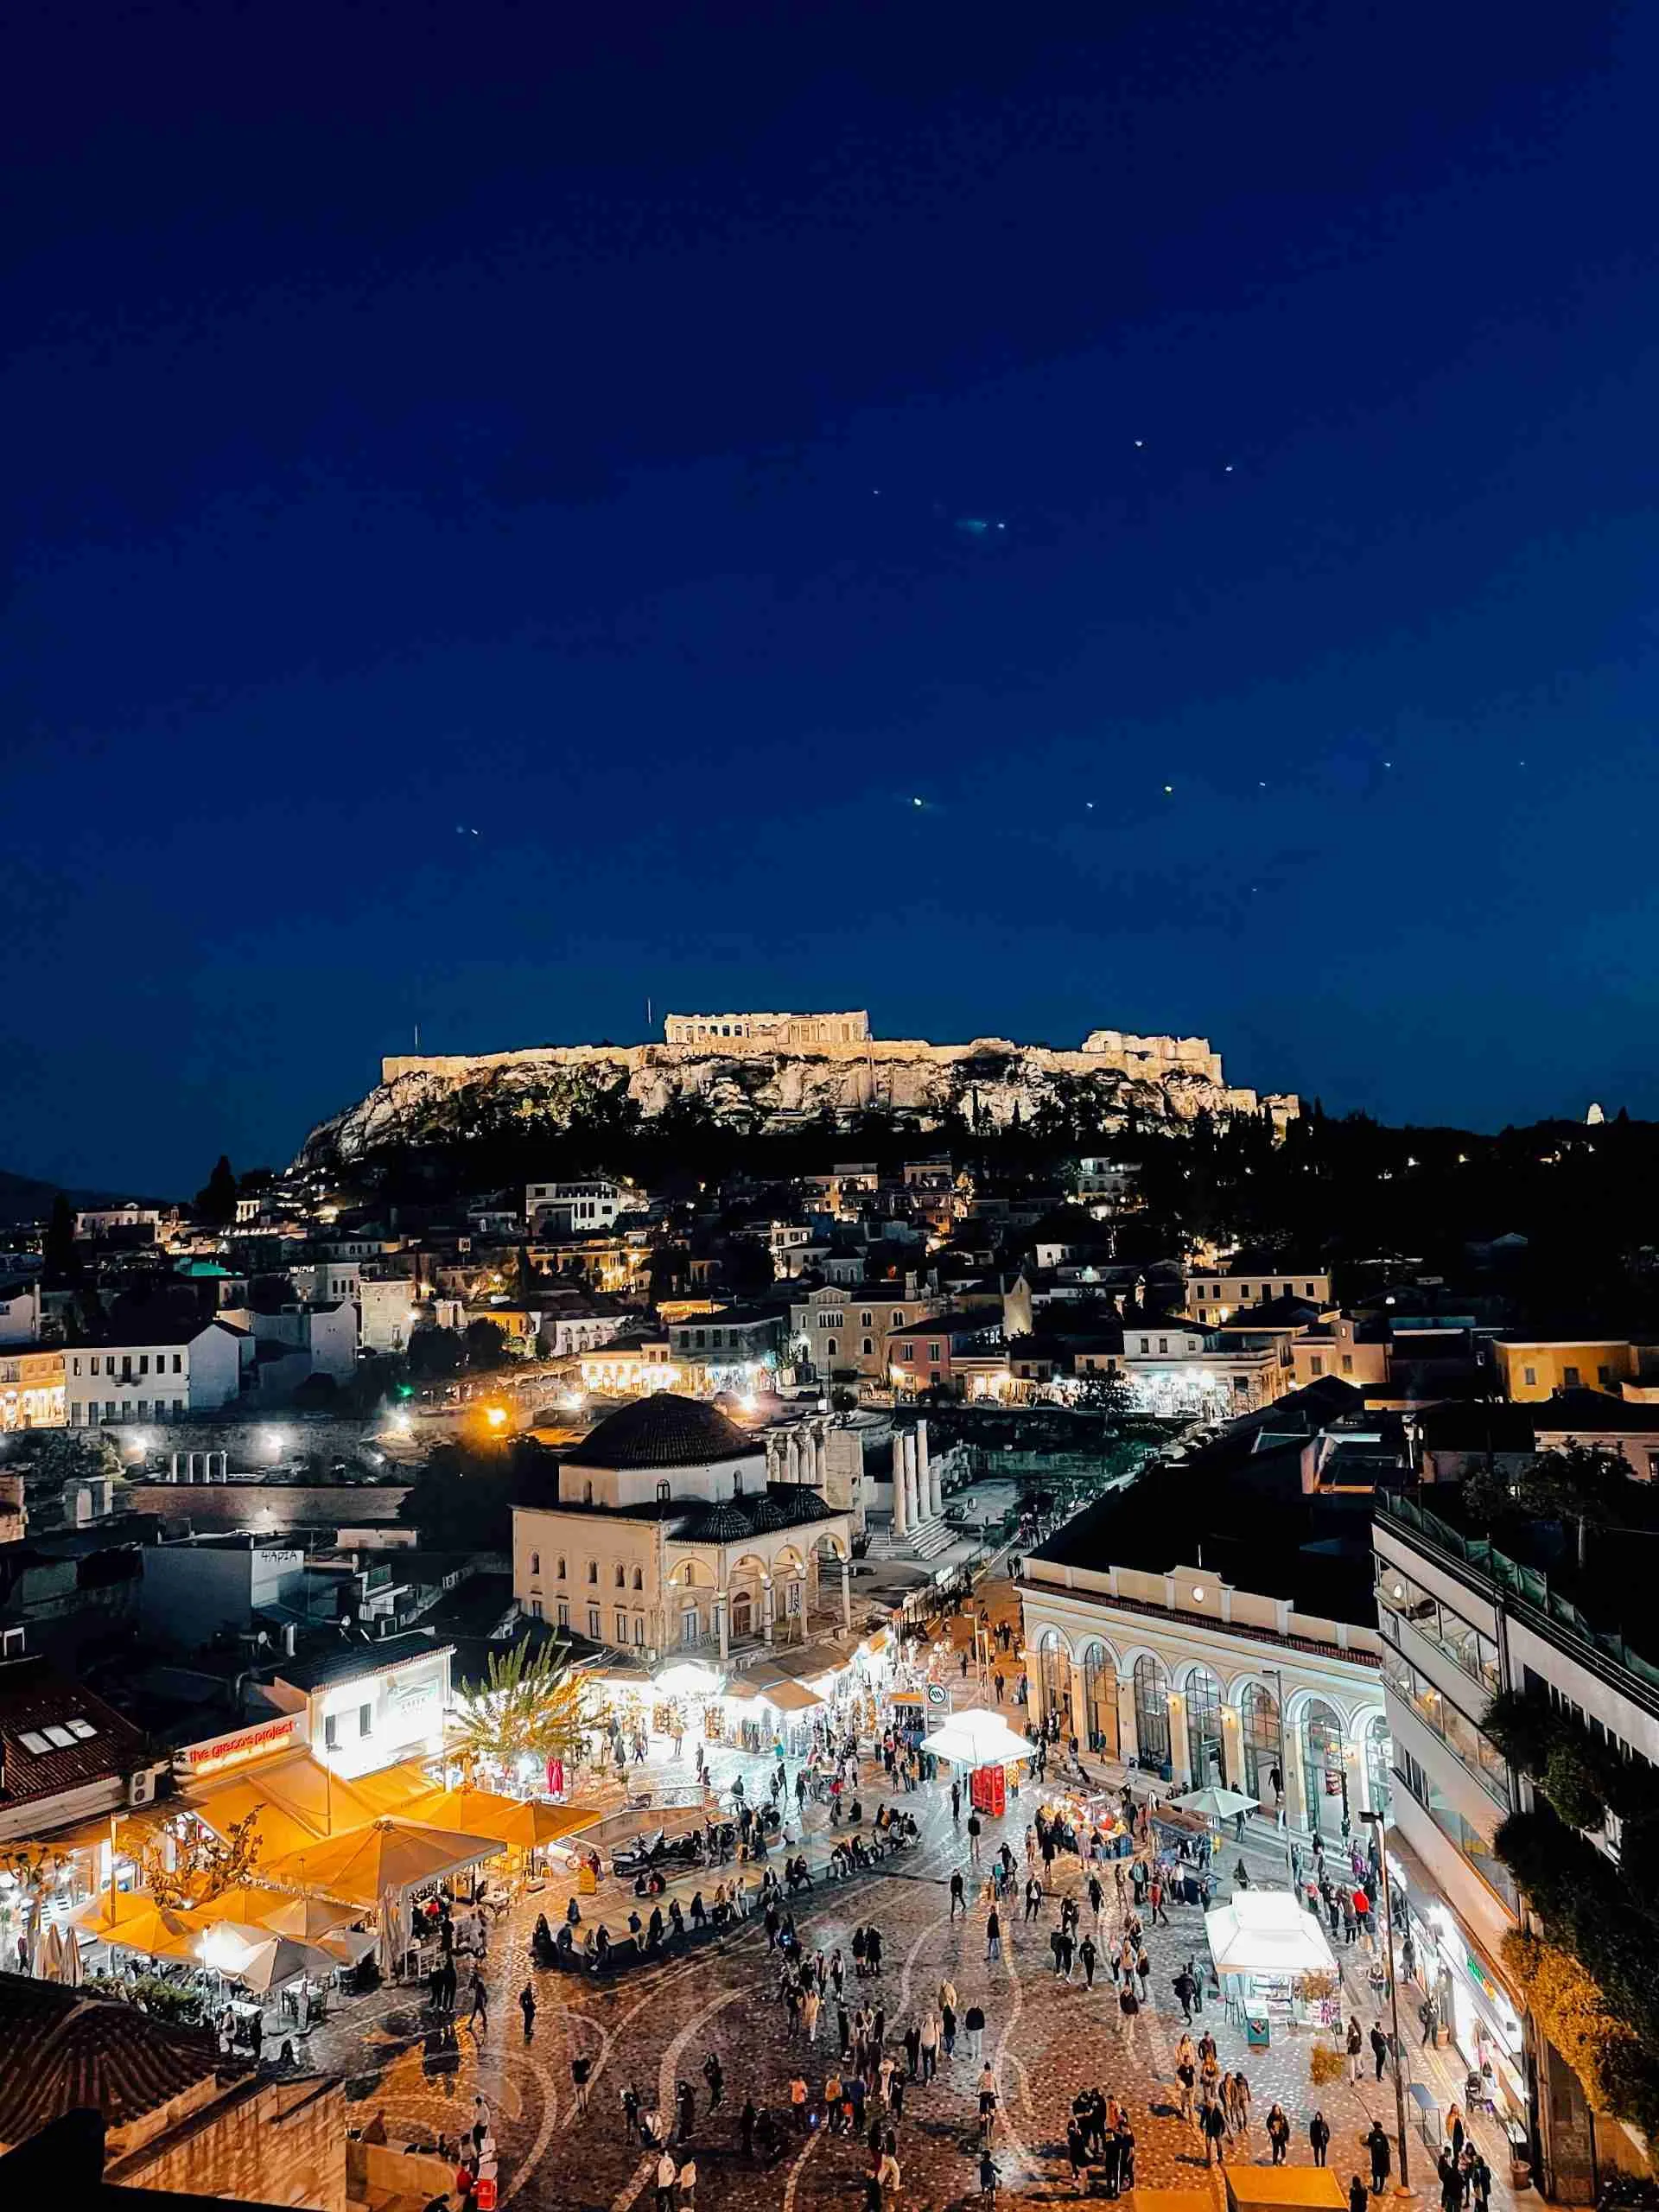 Athens at night overlooking the bustling city from a roof top bar with the Acropolis lit up in the distance